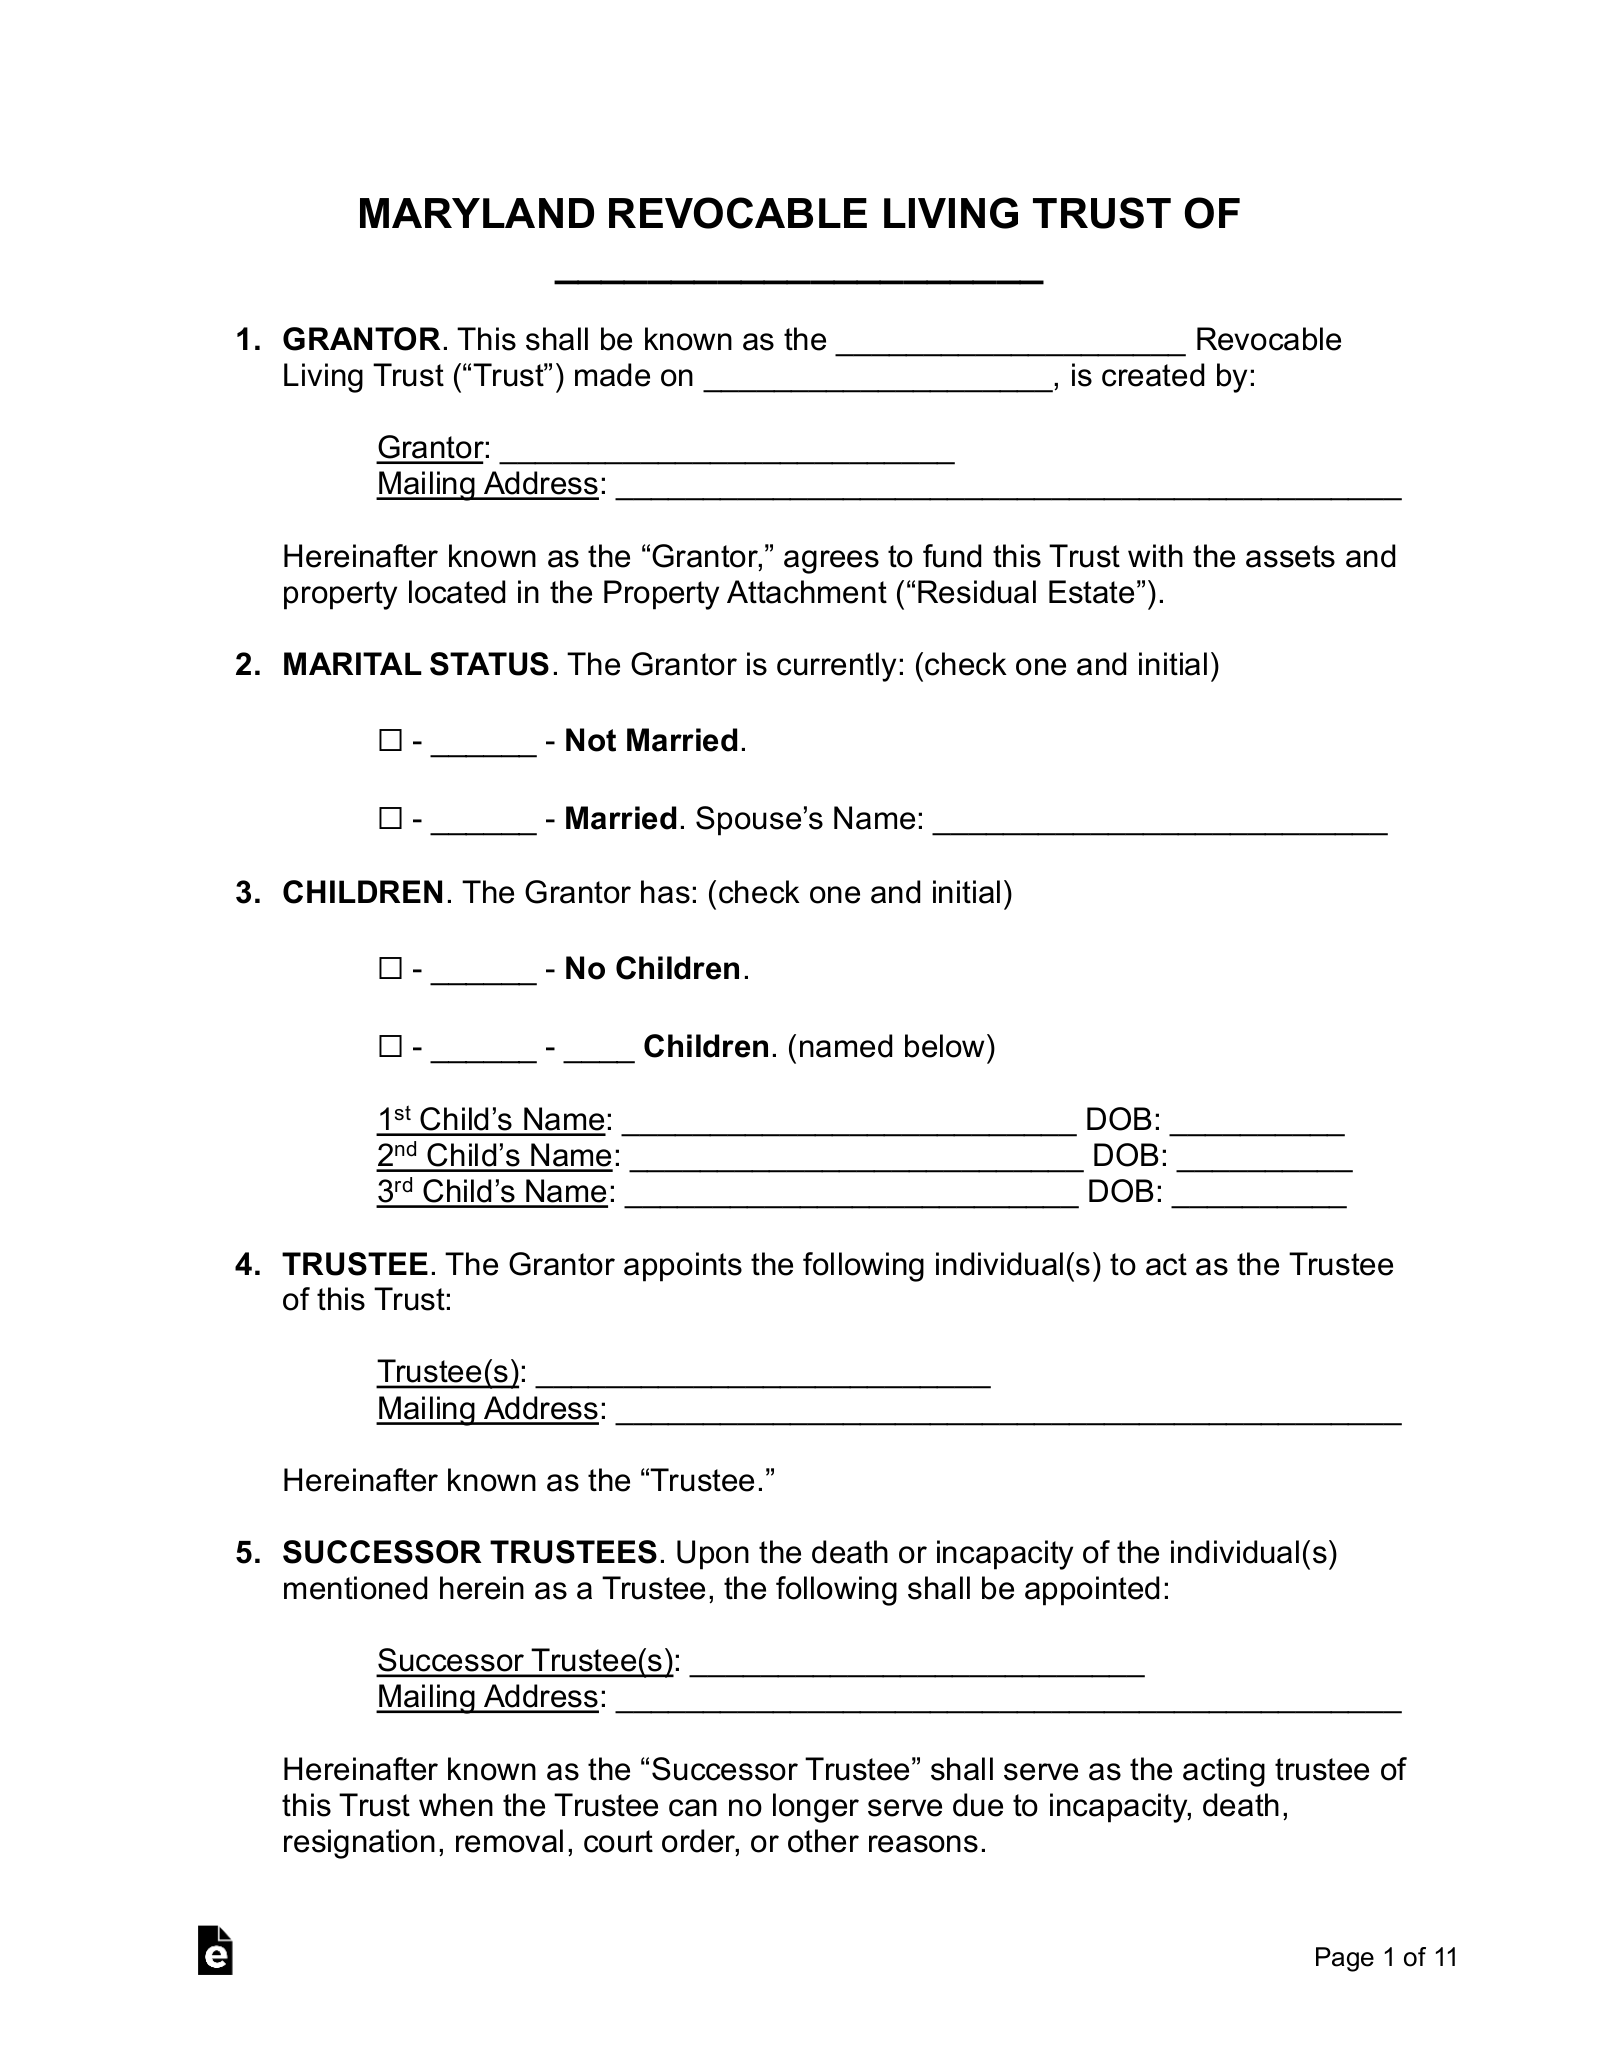 Maryland Living Trust Form (Revocable)